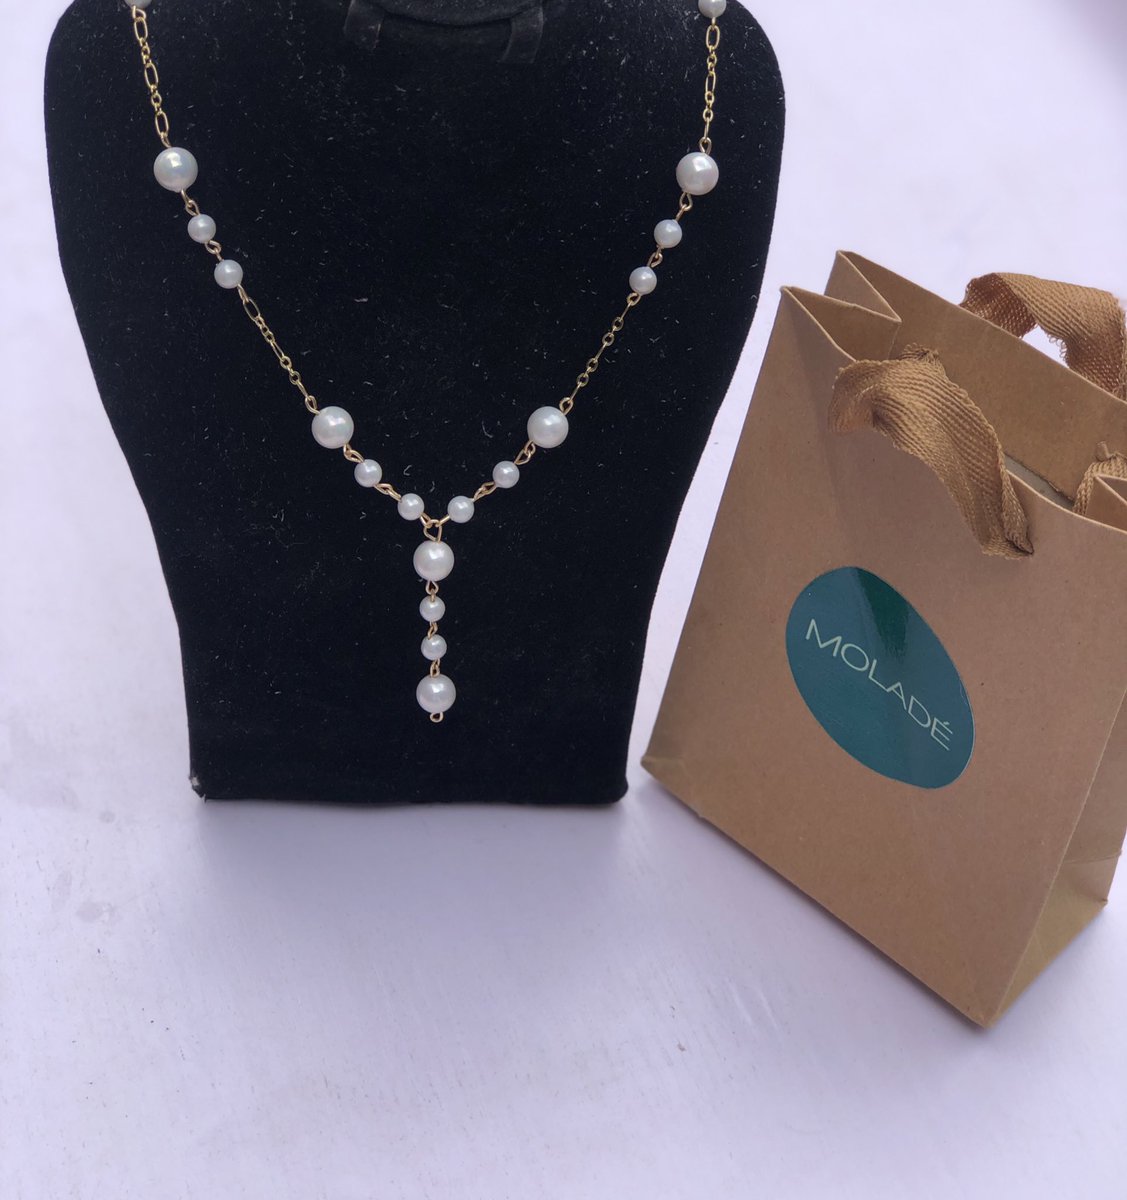 Lariat pearl necklace 
N7,500

Shop @moladepearls